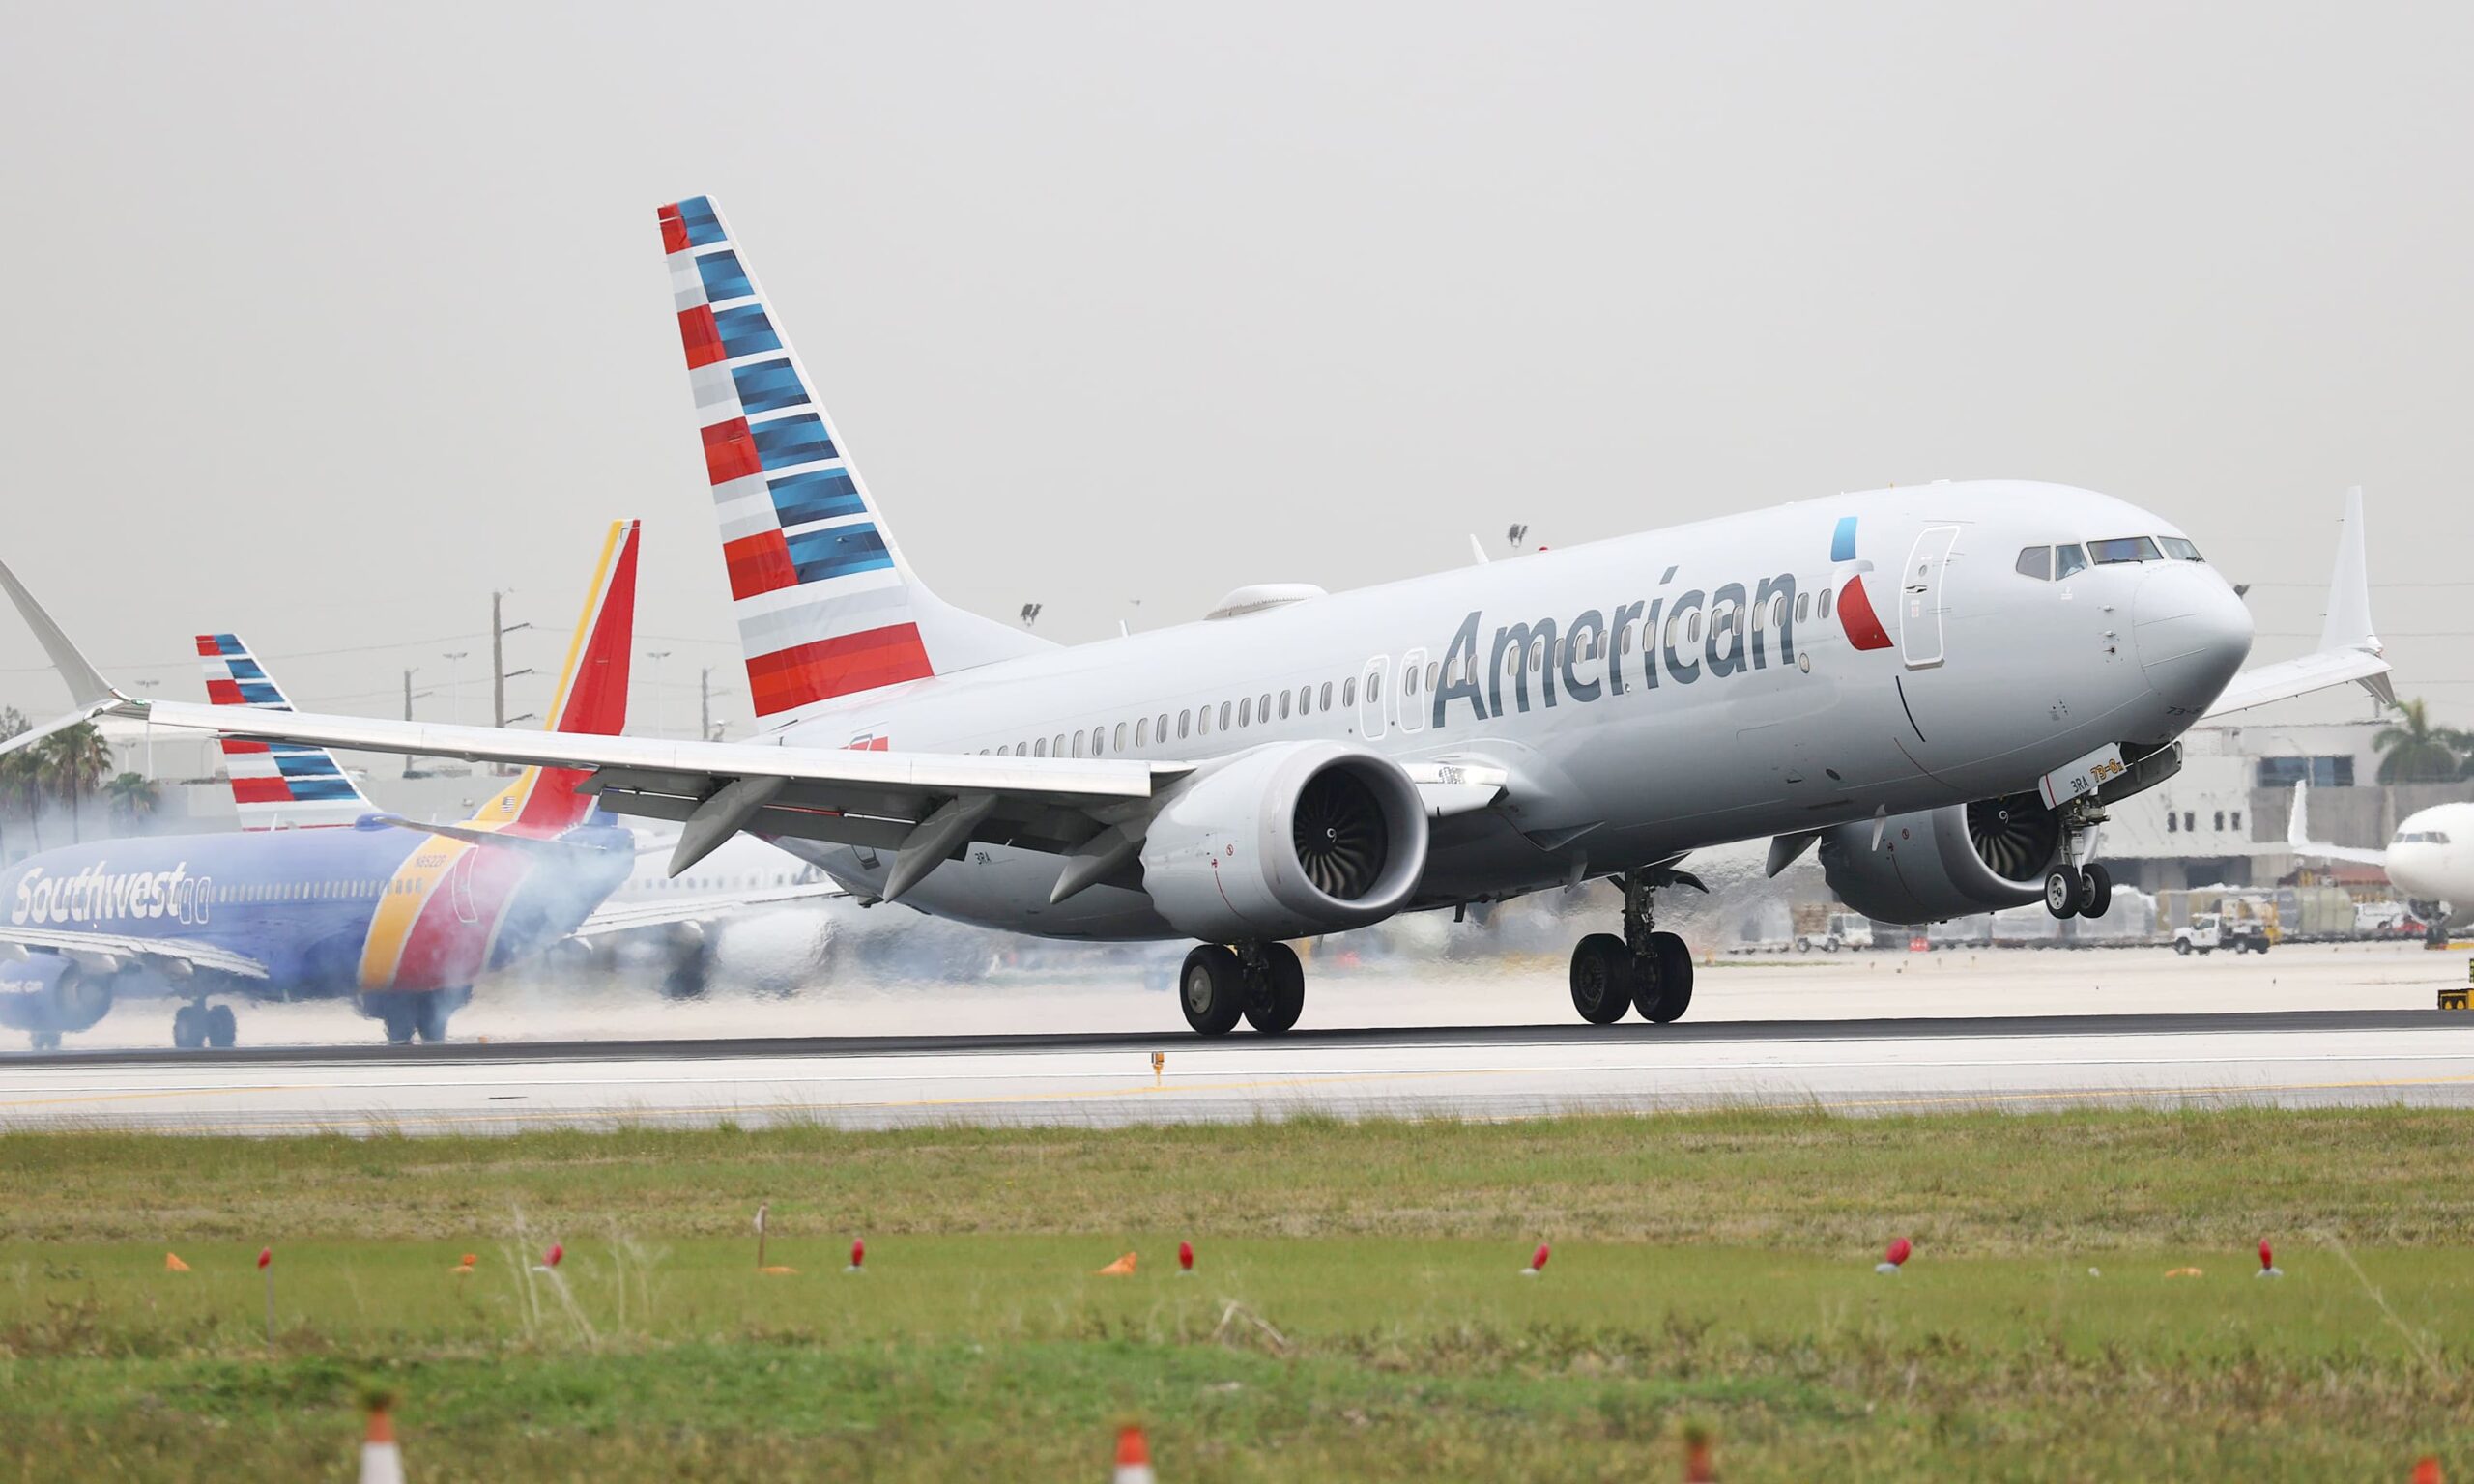 American Airlines reduces flight cancellations but staffing challenges disrupt travel